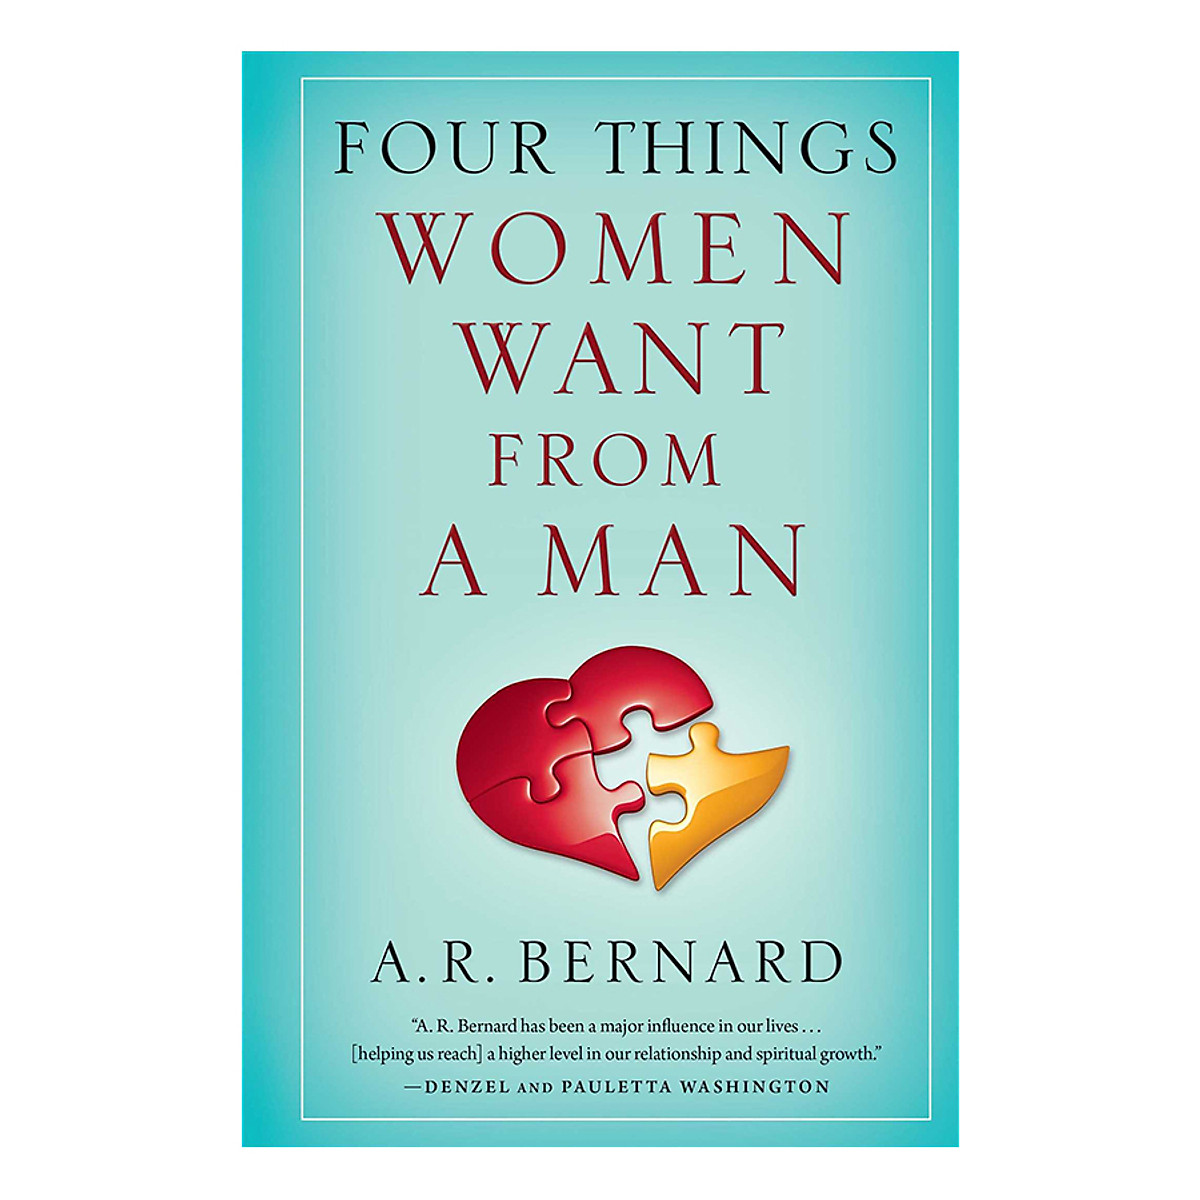 Four Things Women Want From A Man